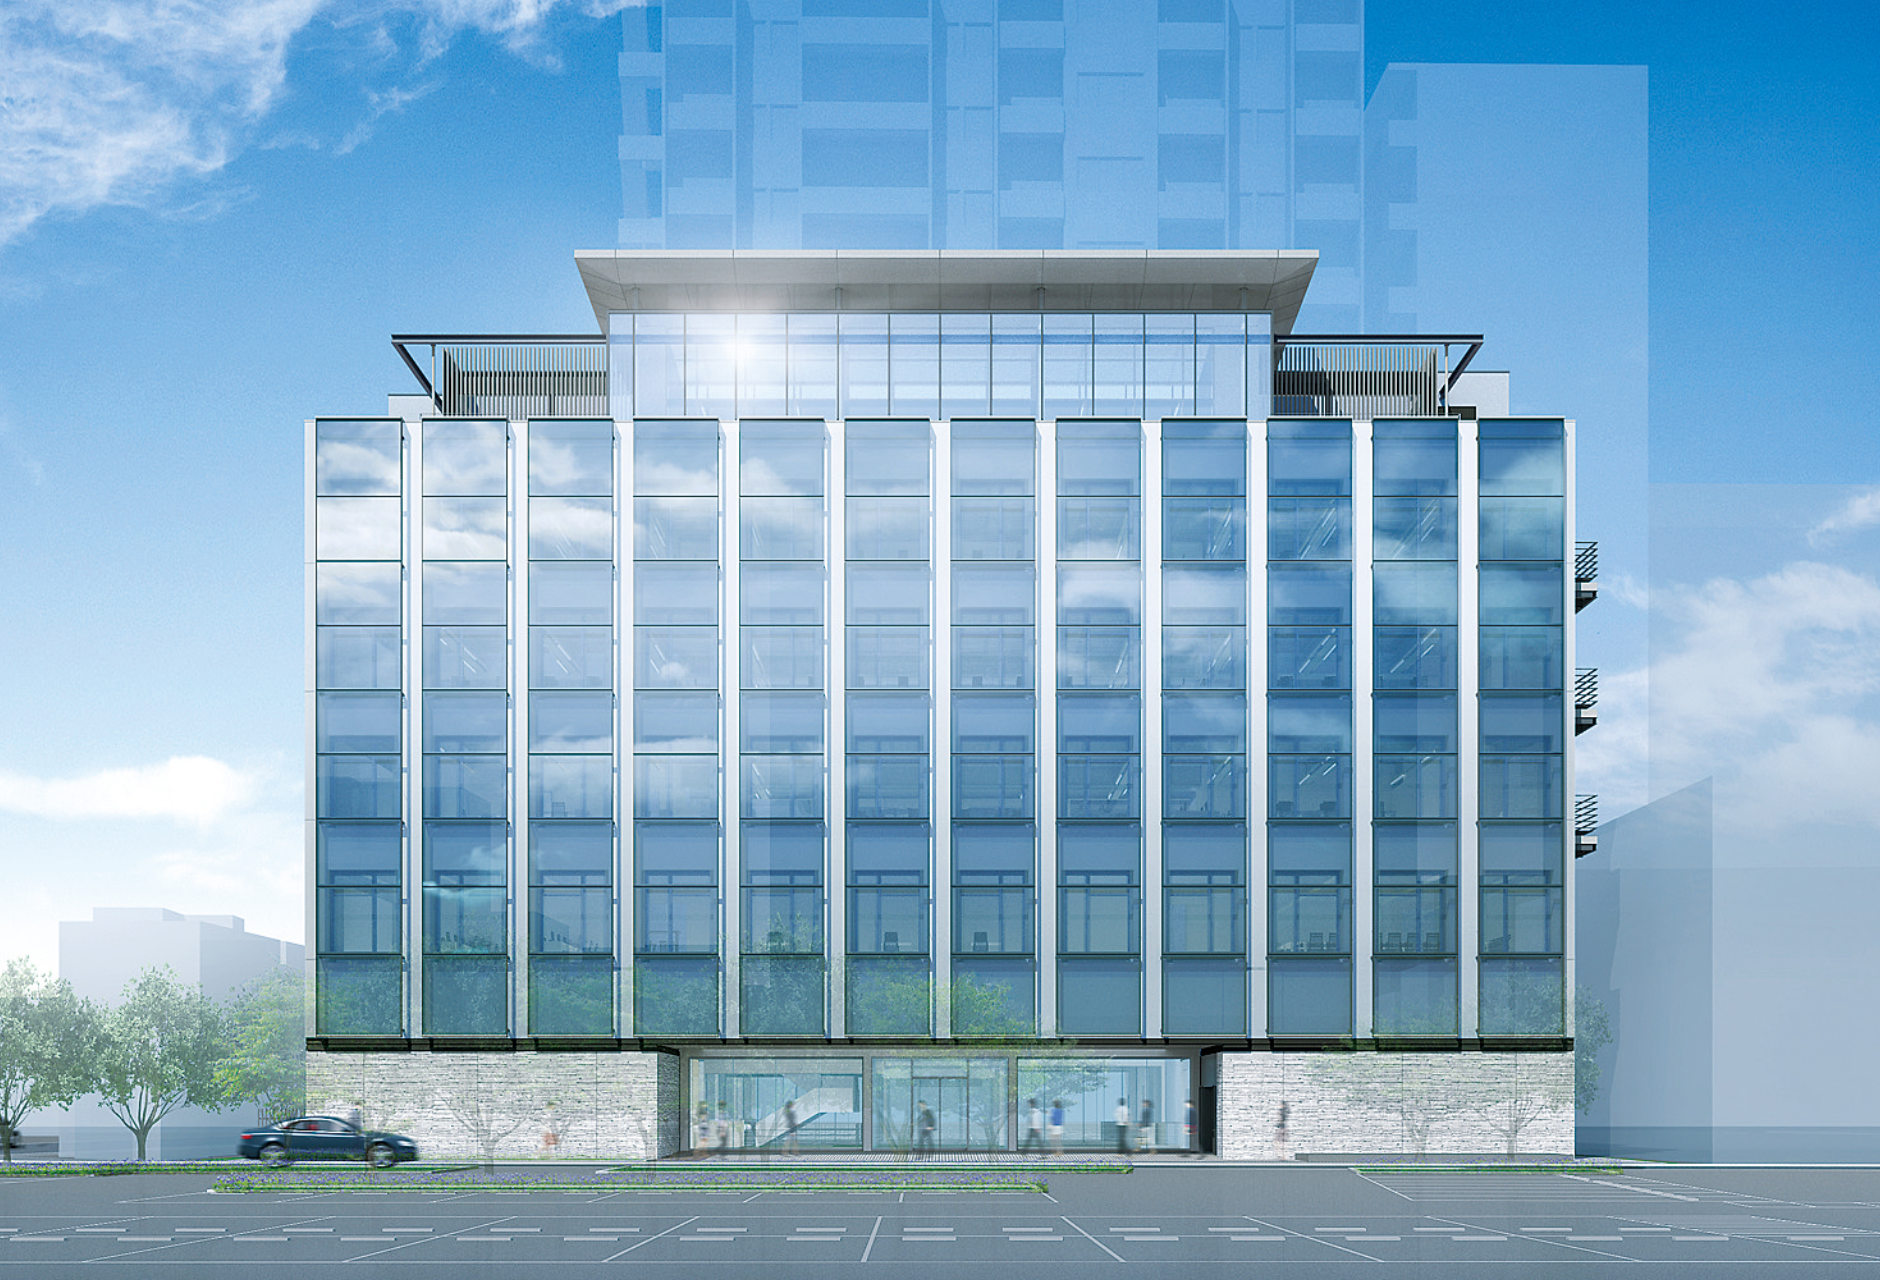 External perspective of the new Tohoku Branch office building with distinctive exterior glass